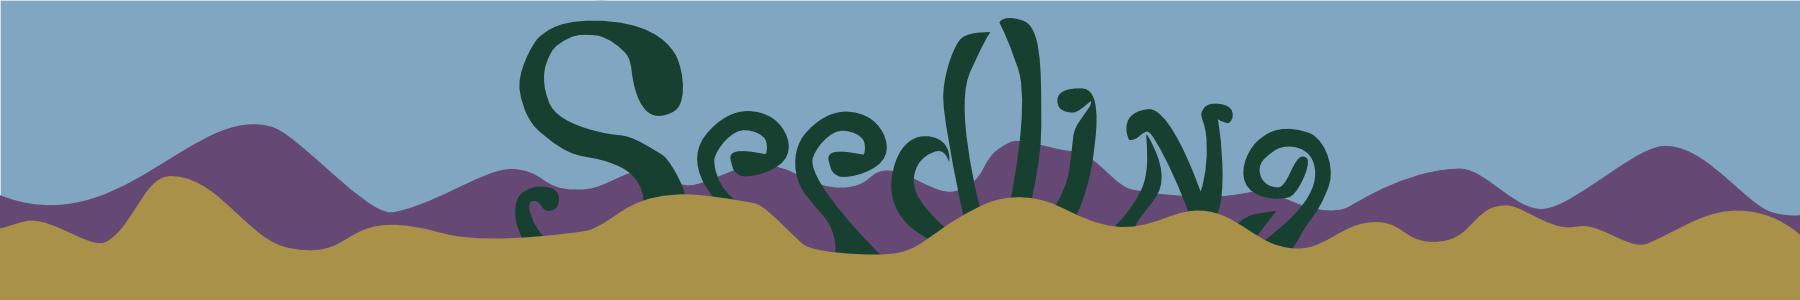 Banner saying 'Seedling' in stylized plants